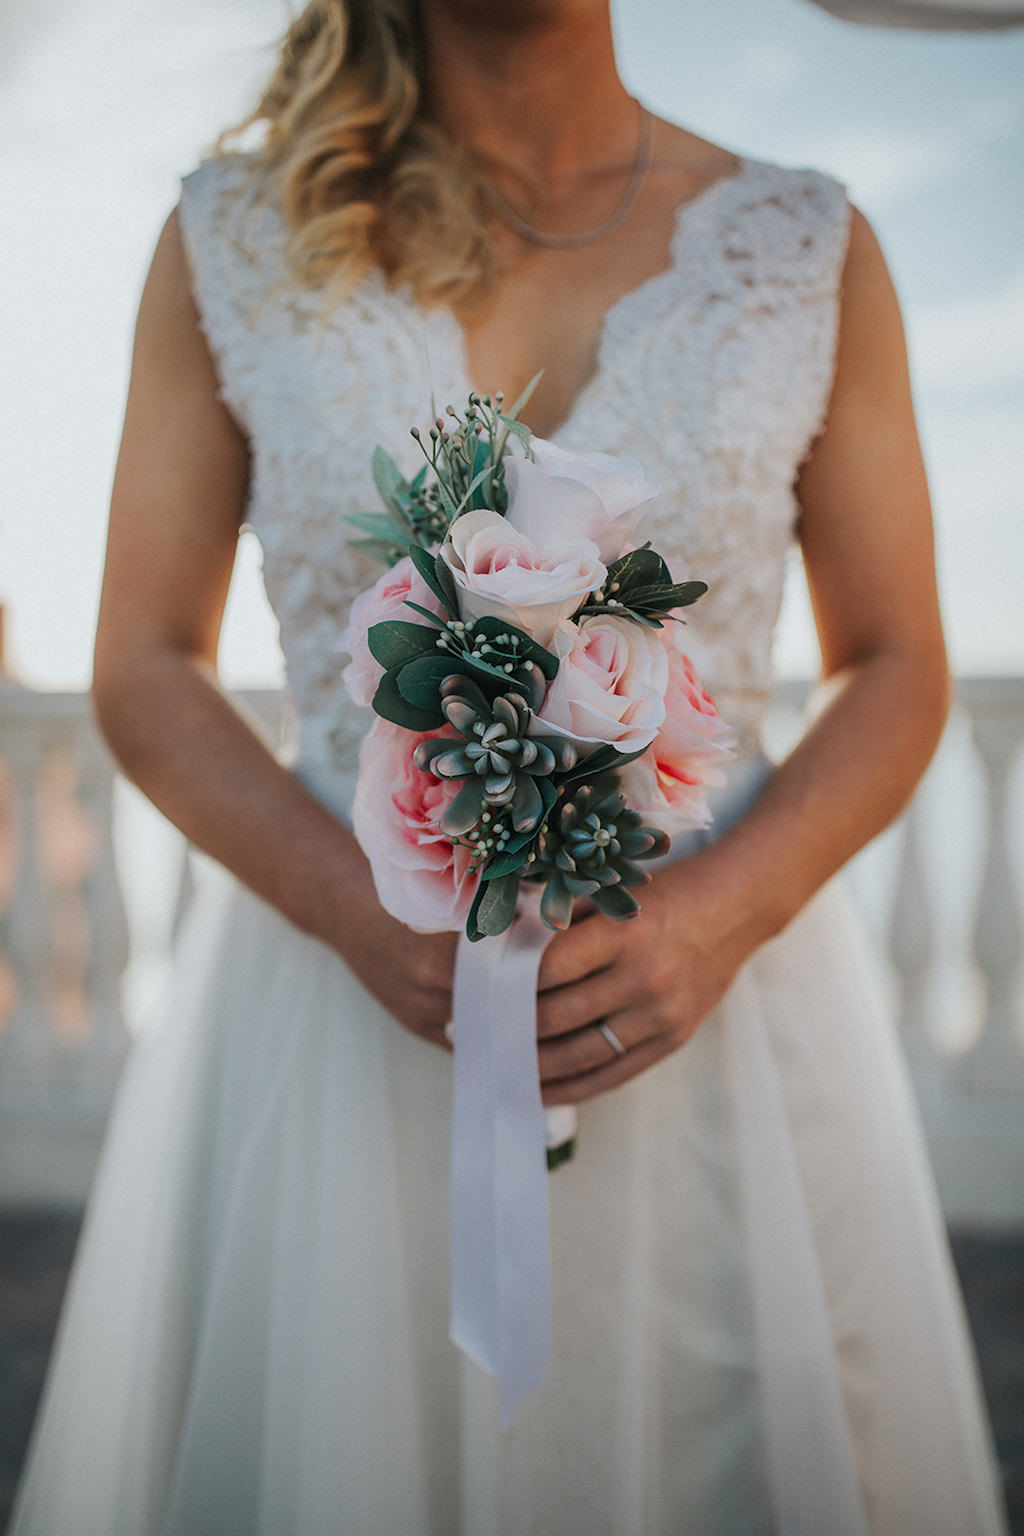 Bride Wedding Portrait with Blush Pink, Succulent and Greenery Bouquet, Lace Tank Top V Neckline A Line Wedding Dress